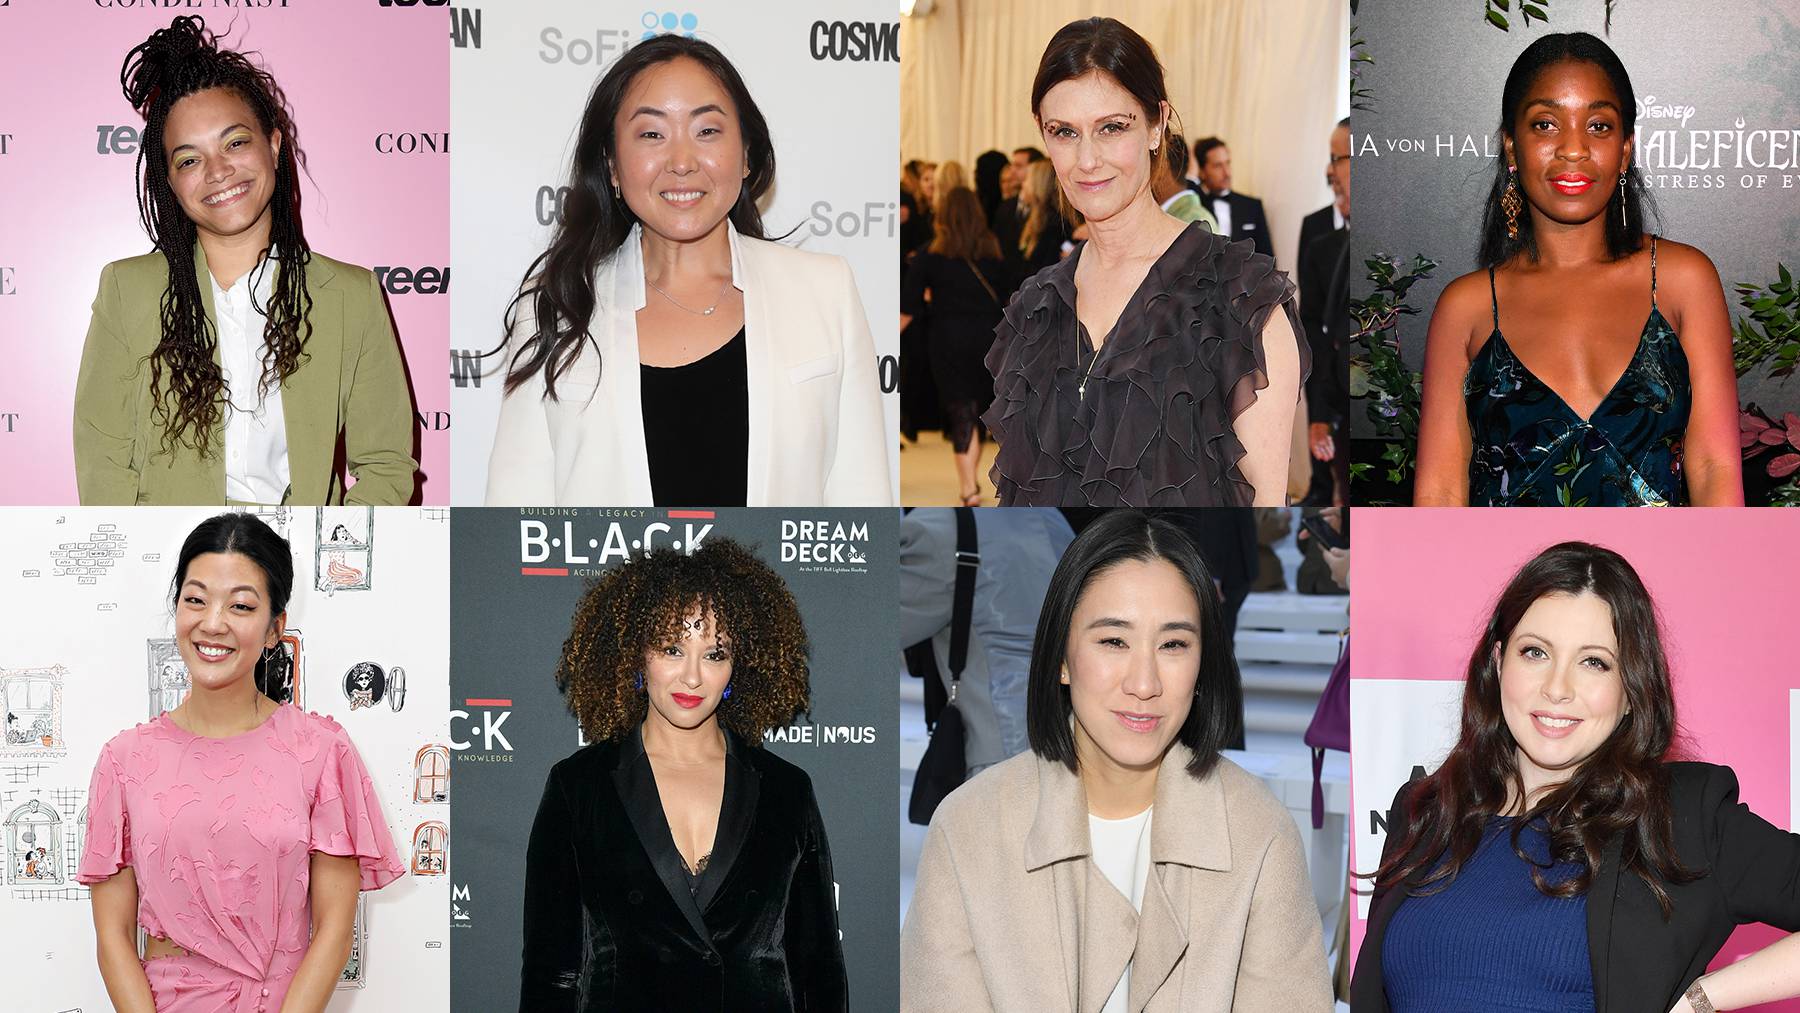 Them’s editor-in-chief Whembley Sewell, former Marie Claire editor Aya Kanai, former Vogue editor Sally Singer, former Teen Vogue and Allure fashion director Rajni Jacques, former Allure editor-in-chief Michelle Lee, former Elle Canada editor Vanessa Craft, former Lucky editor-in-chief Eva Chen, former Self editor Carolyn Kylstra. Getty Images.